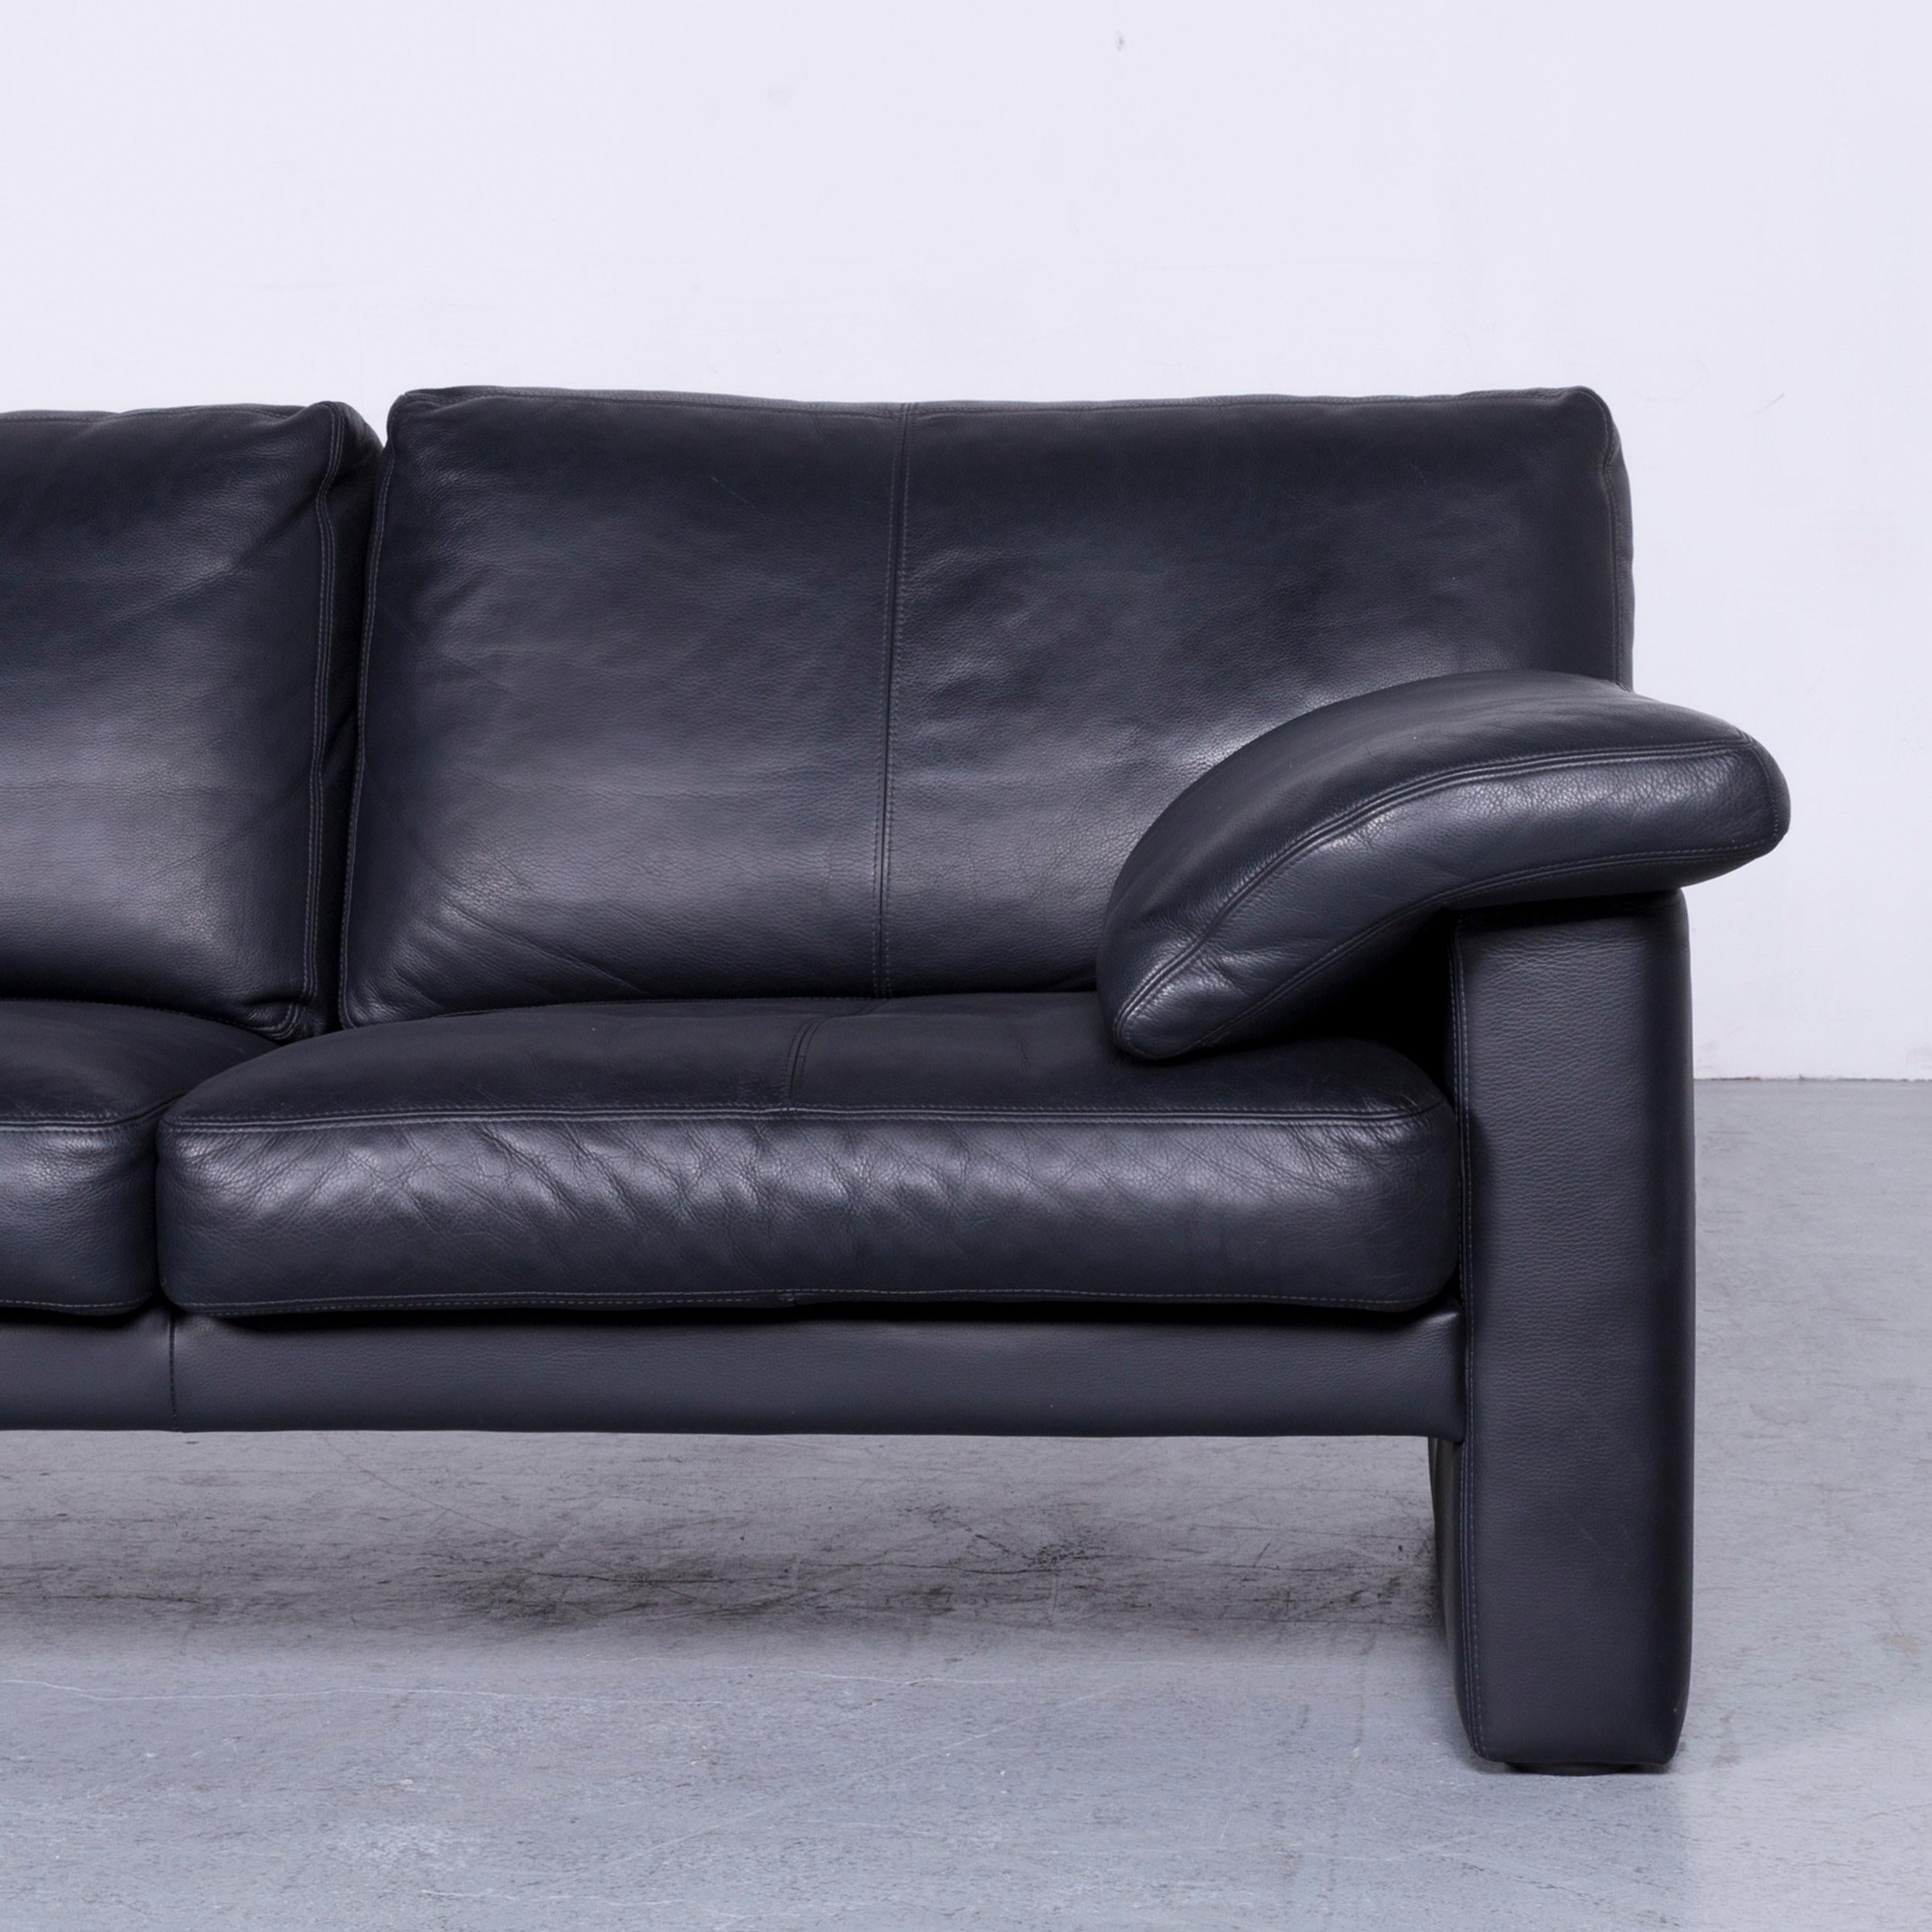 German Erpo Designer Leather Sofa Black Two-Seat Couch